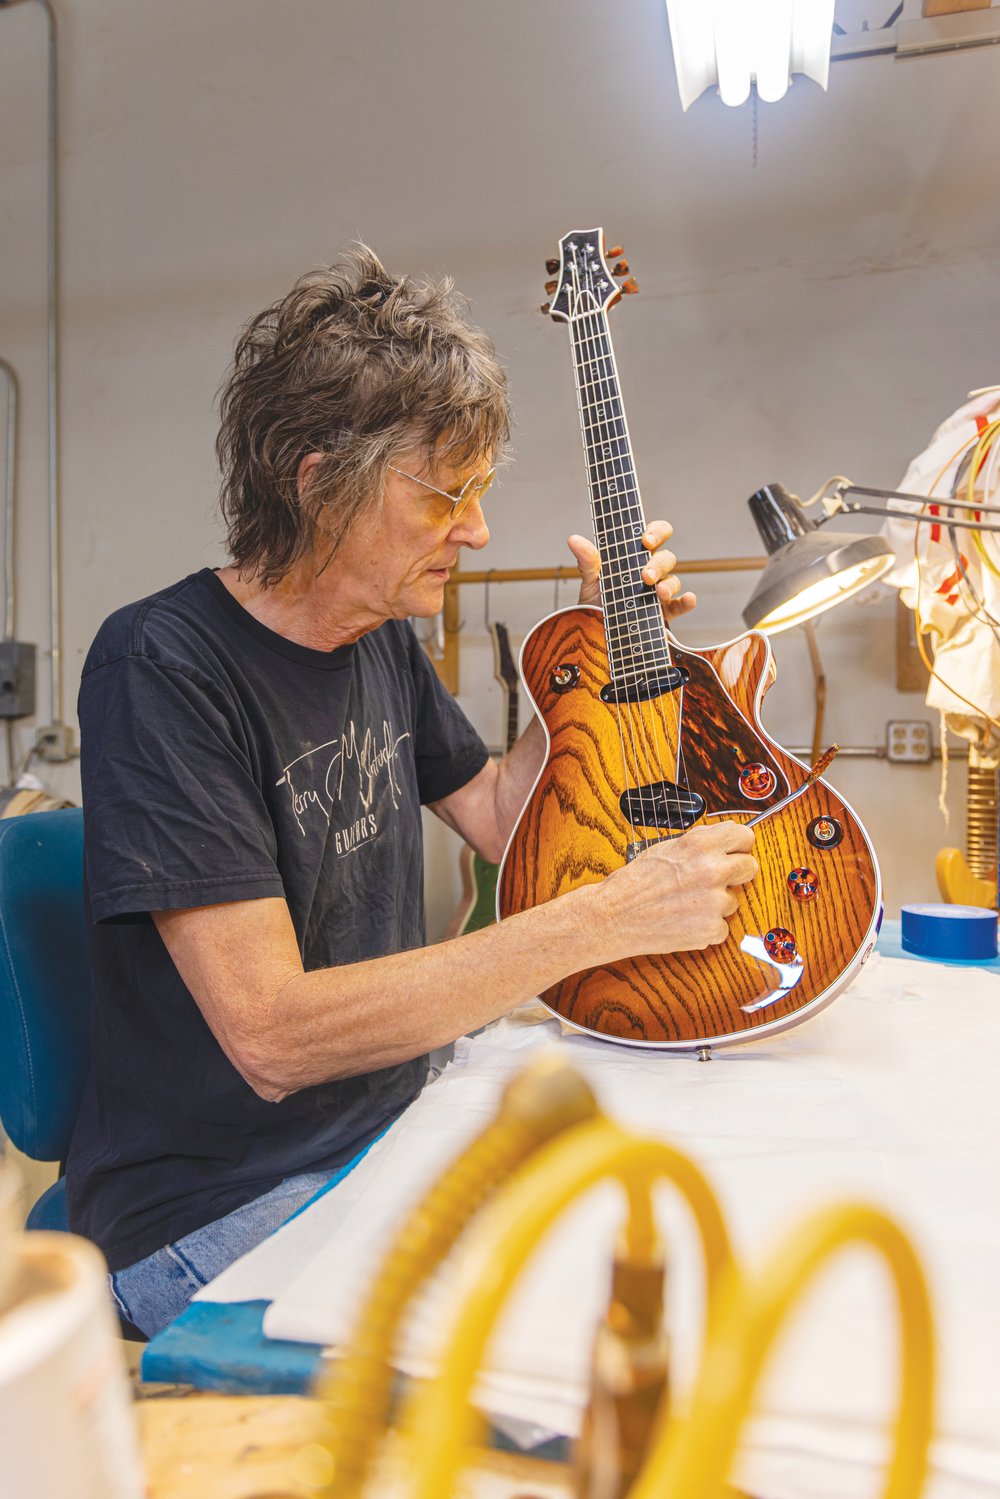 Terry McInturff, who's built guitars for some of rock's luminaries, poses with a new creation. The Koo Day Tah event, which, in part, honors his birthday, is set for Saturday in Siler City.